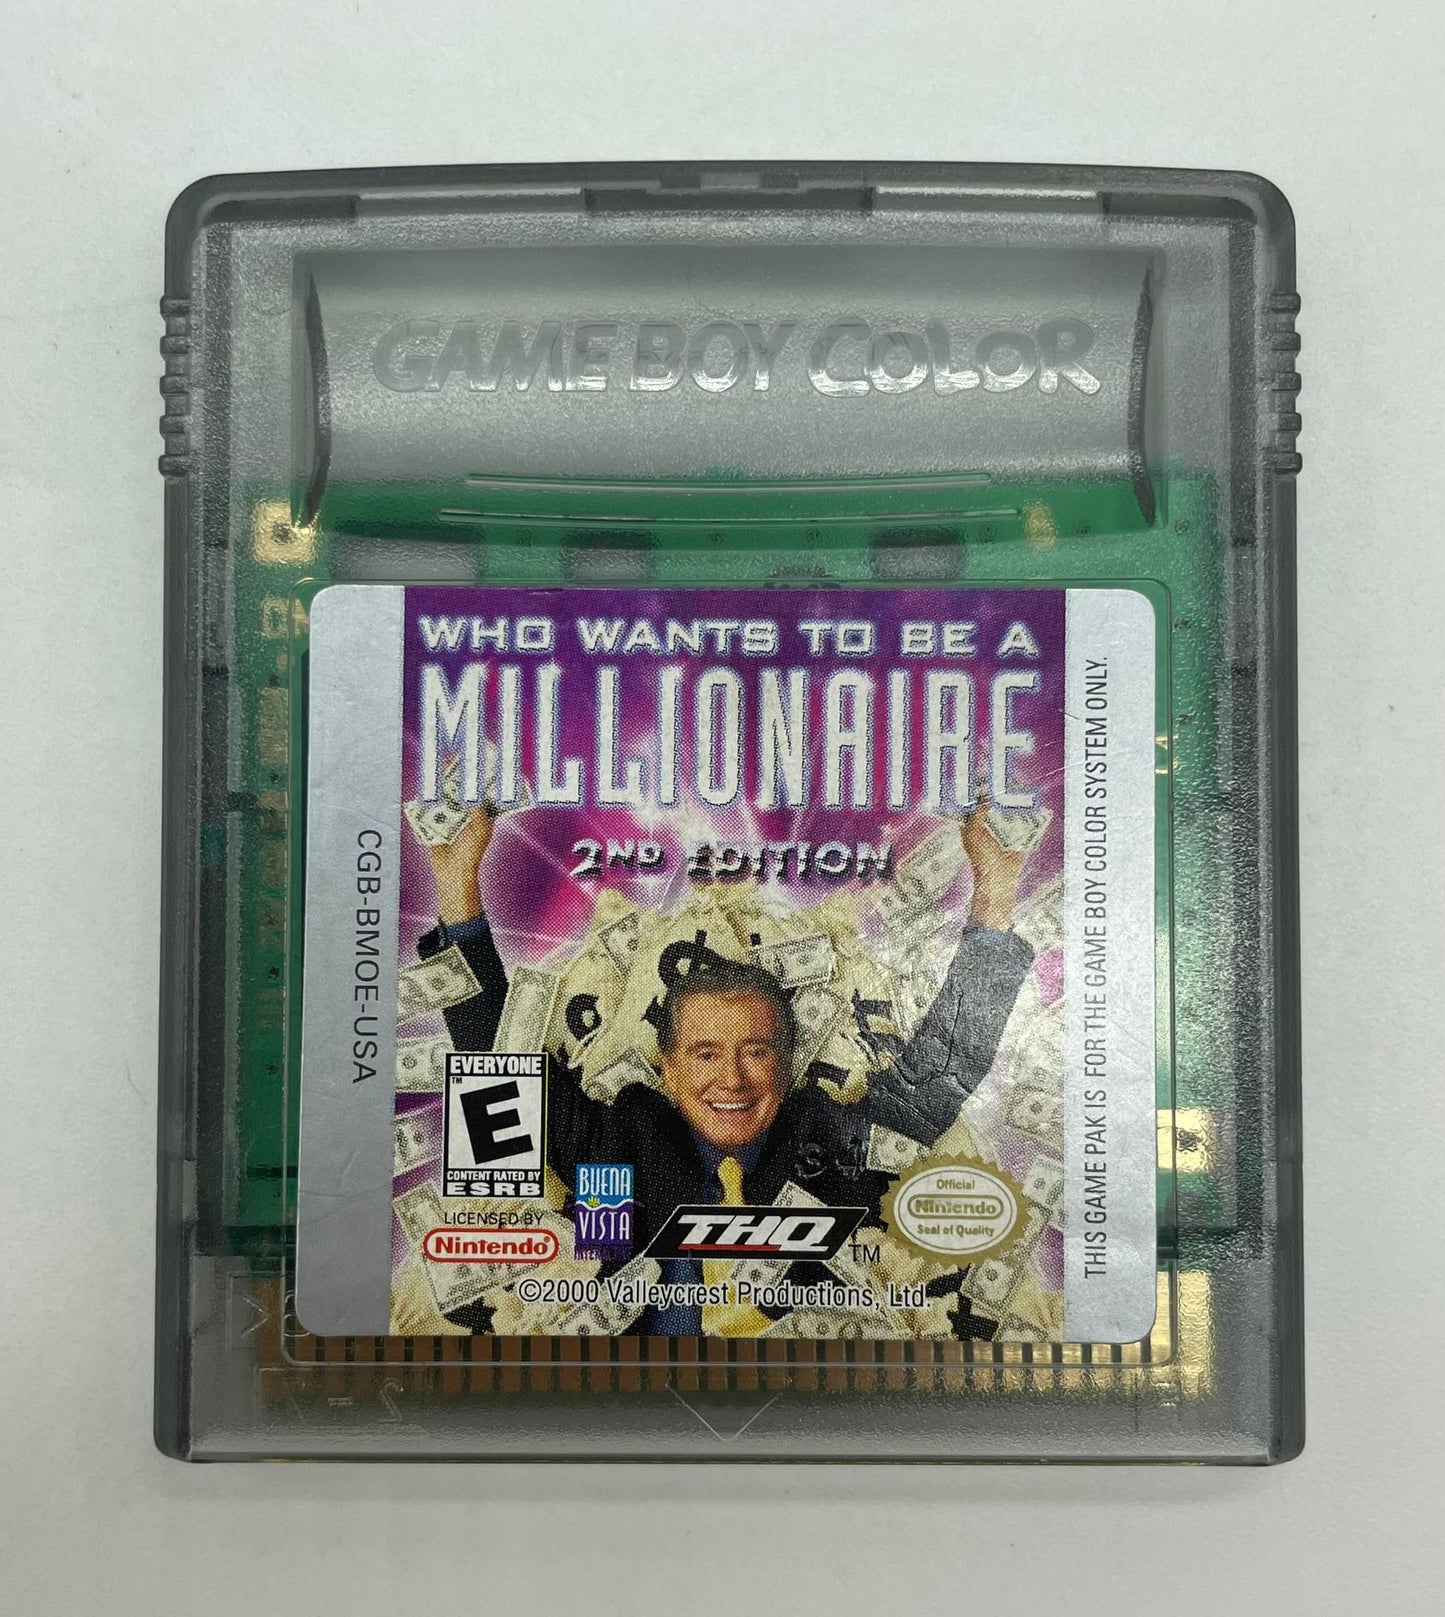 Who wants to be a Millionaire: 2nd Edition - Game Boy Color Modul